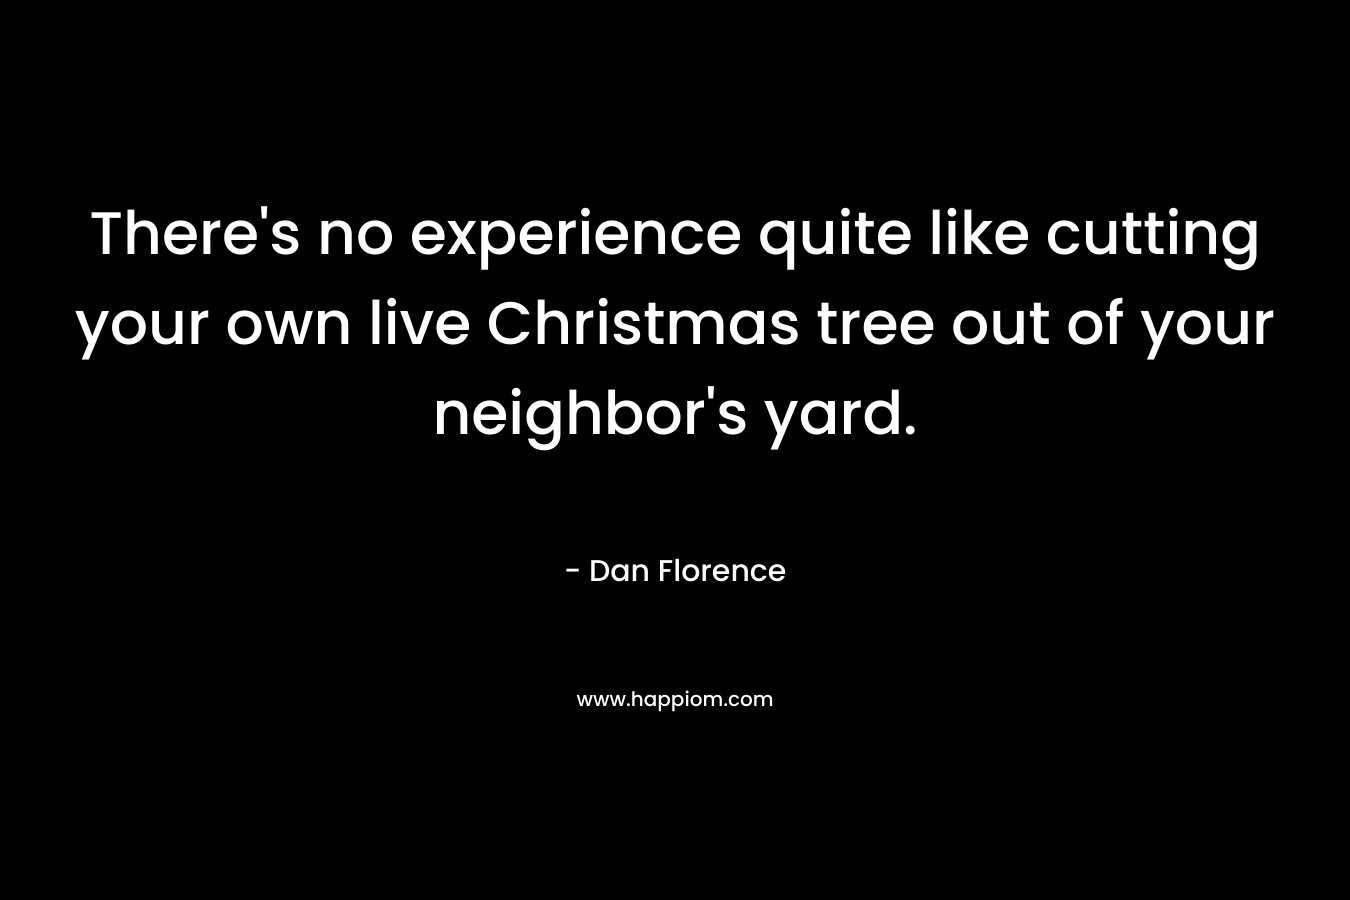 There’s no experience quite like cutting your own live Christmas tree out of your neighbor’s yard. – Dan Florence